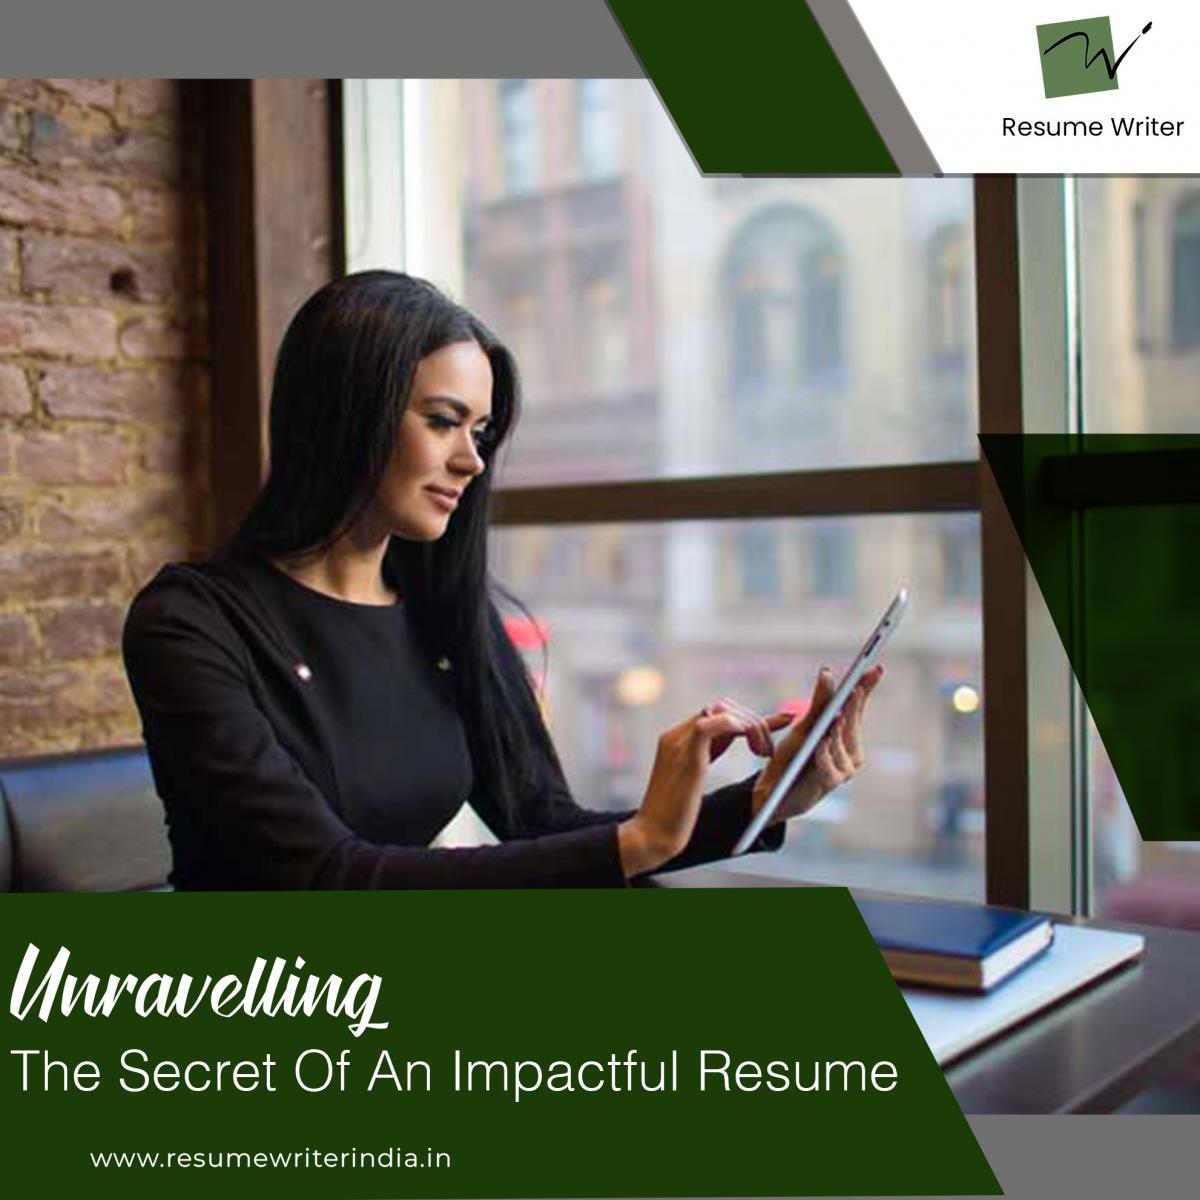 Unraveling The Secret Of An Impactful Resume